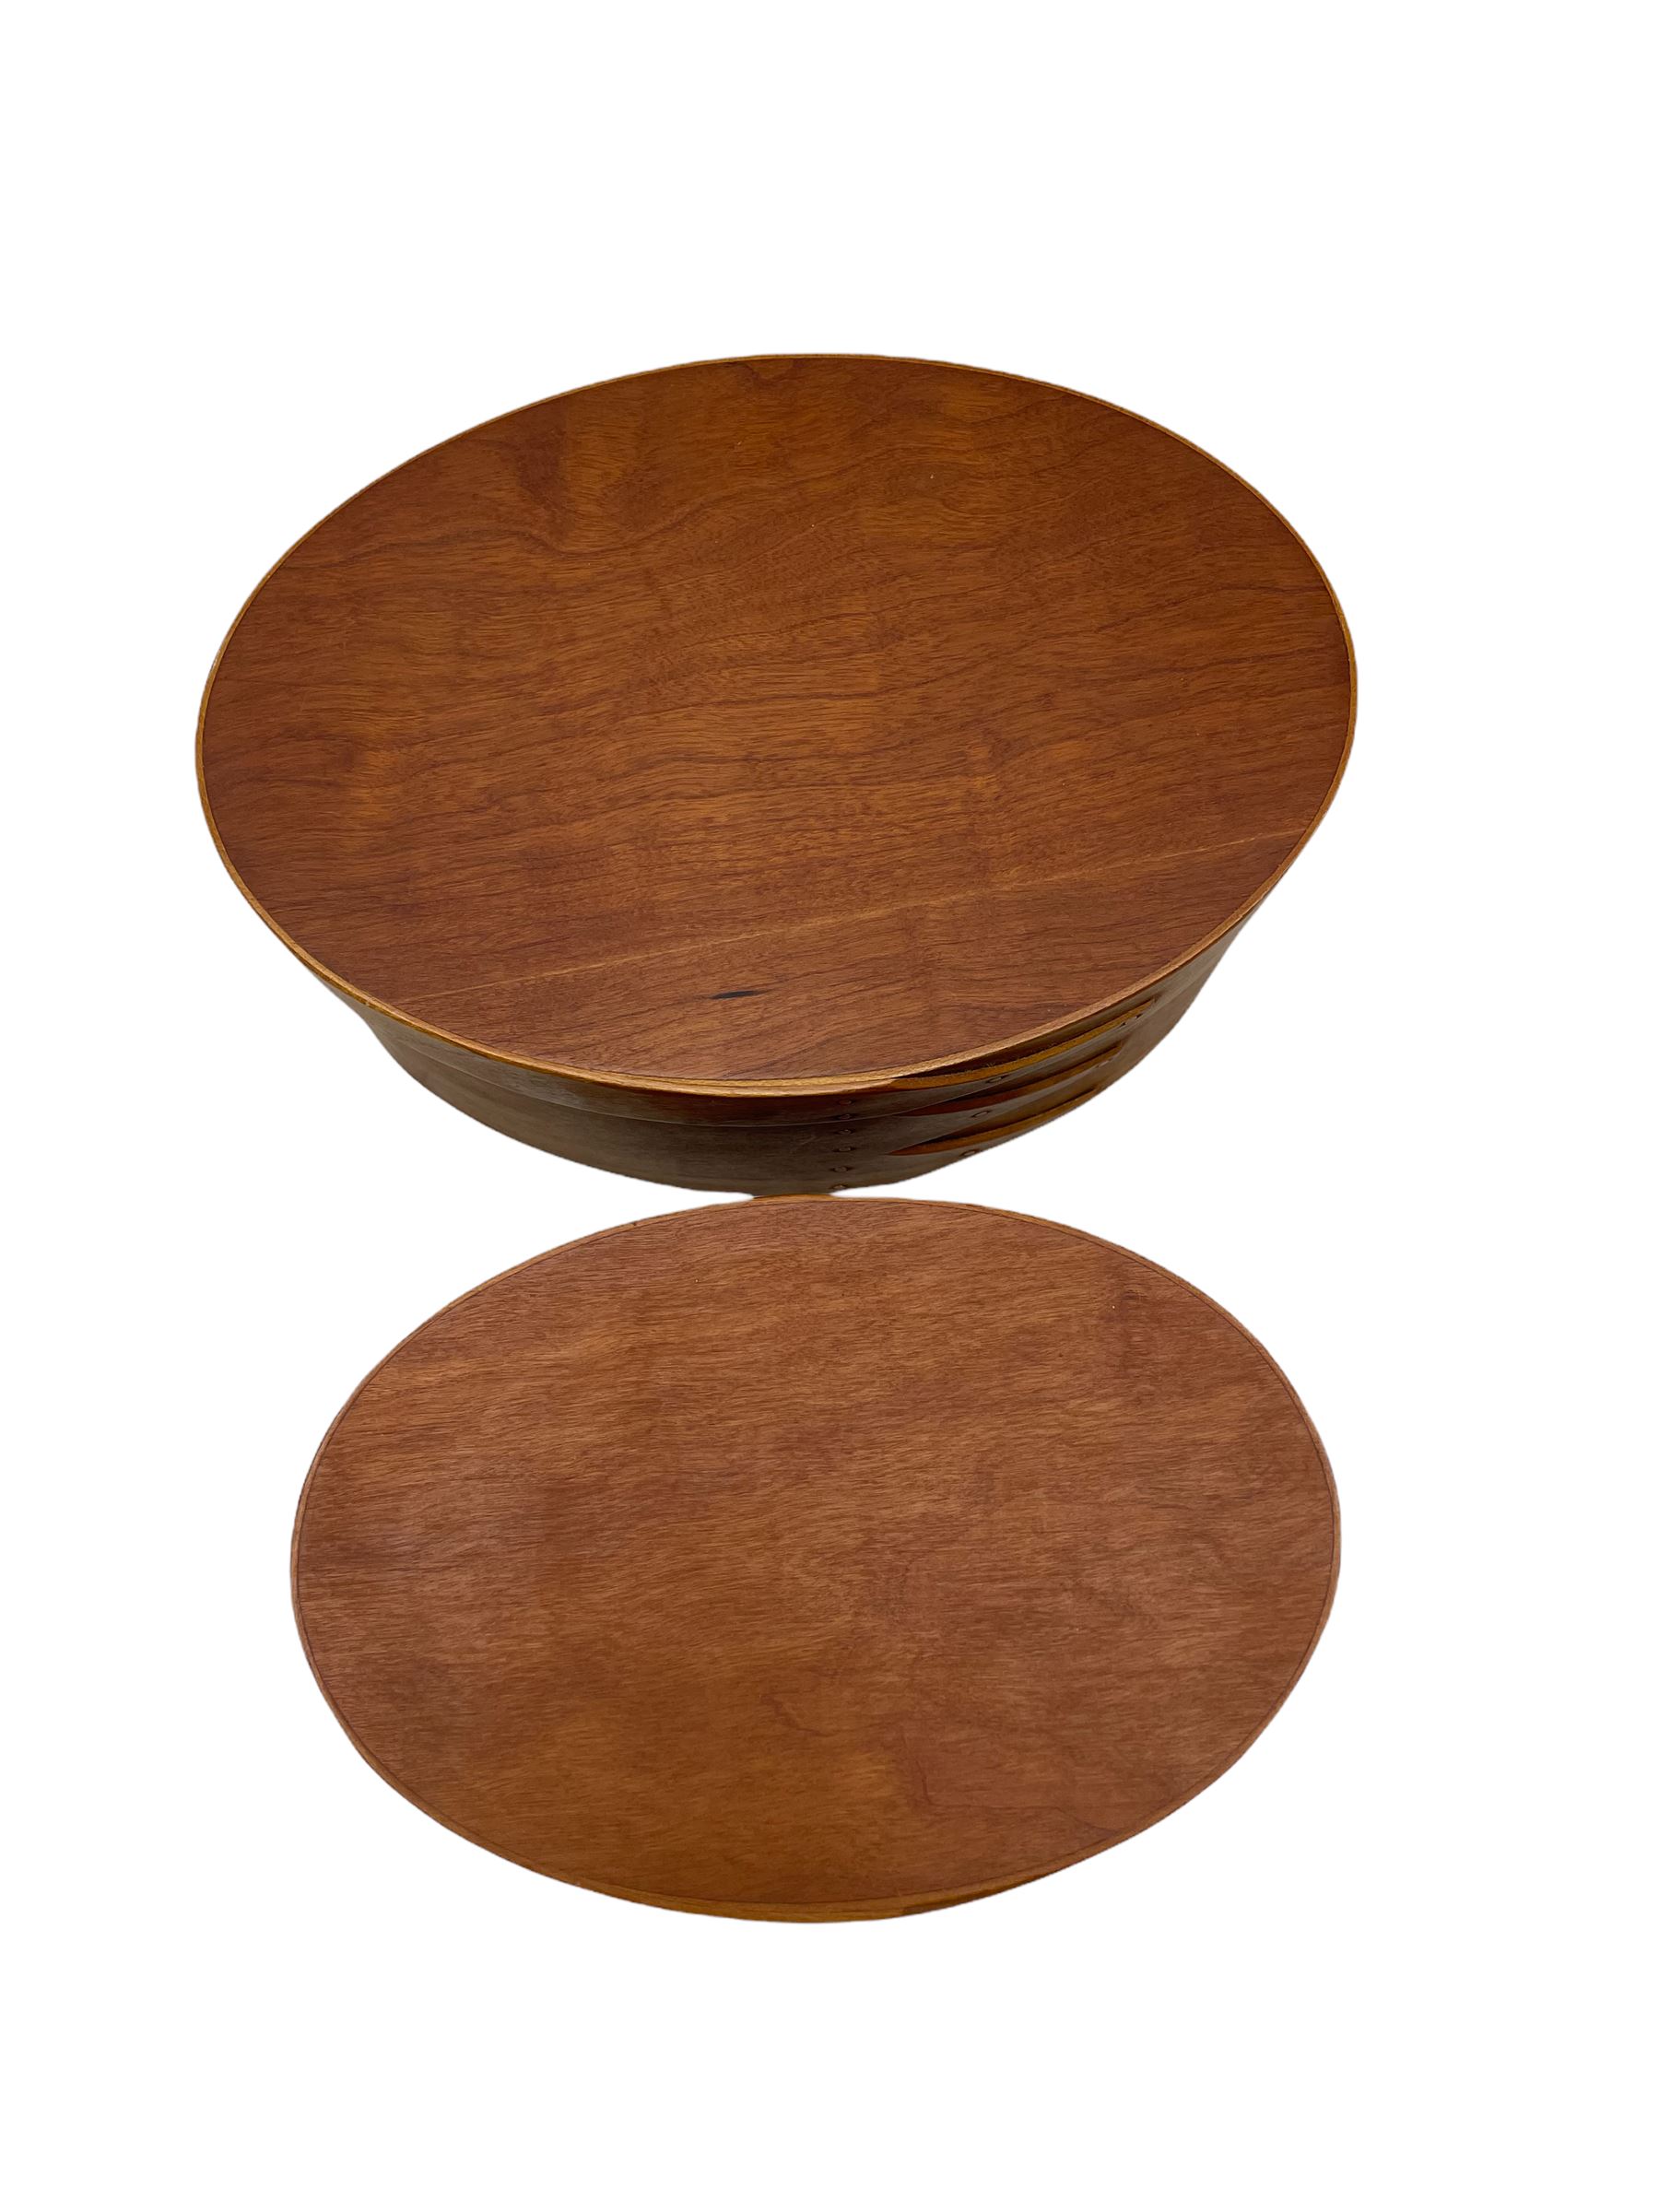 DS Pair of graduated bentwood Shaker style oval boxes by Orleans Carpenters, each with